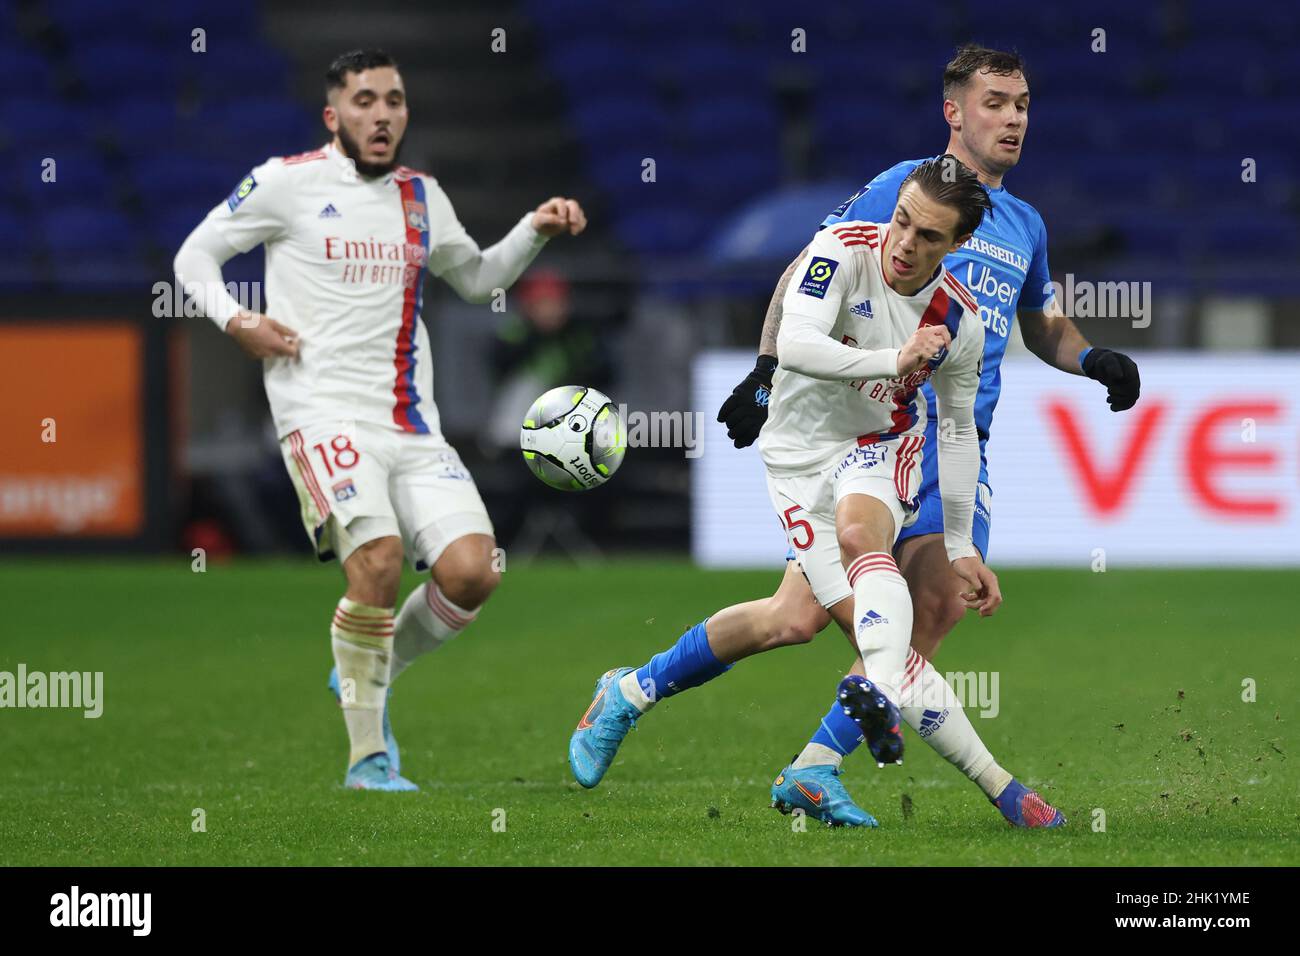 Lyon, France, 1st February 2022. Rayan Cherki of Lyon looks on as team mate Maxence Caqueret of Lyon dispossesses Pol Lirola of Olympique De Marseille during the Uber Eats Ligue 1 match at the Groupama Stadium, Lyon. Picture credit should read: Jonathan Moscrop / Sportimage Stock Photo